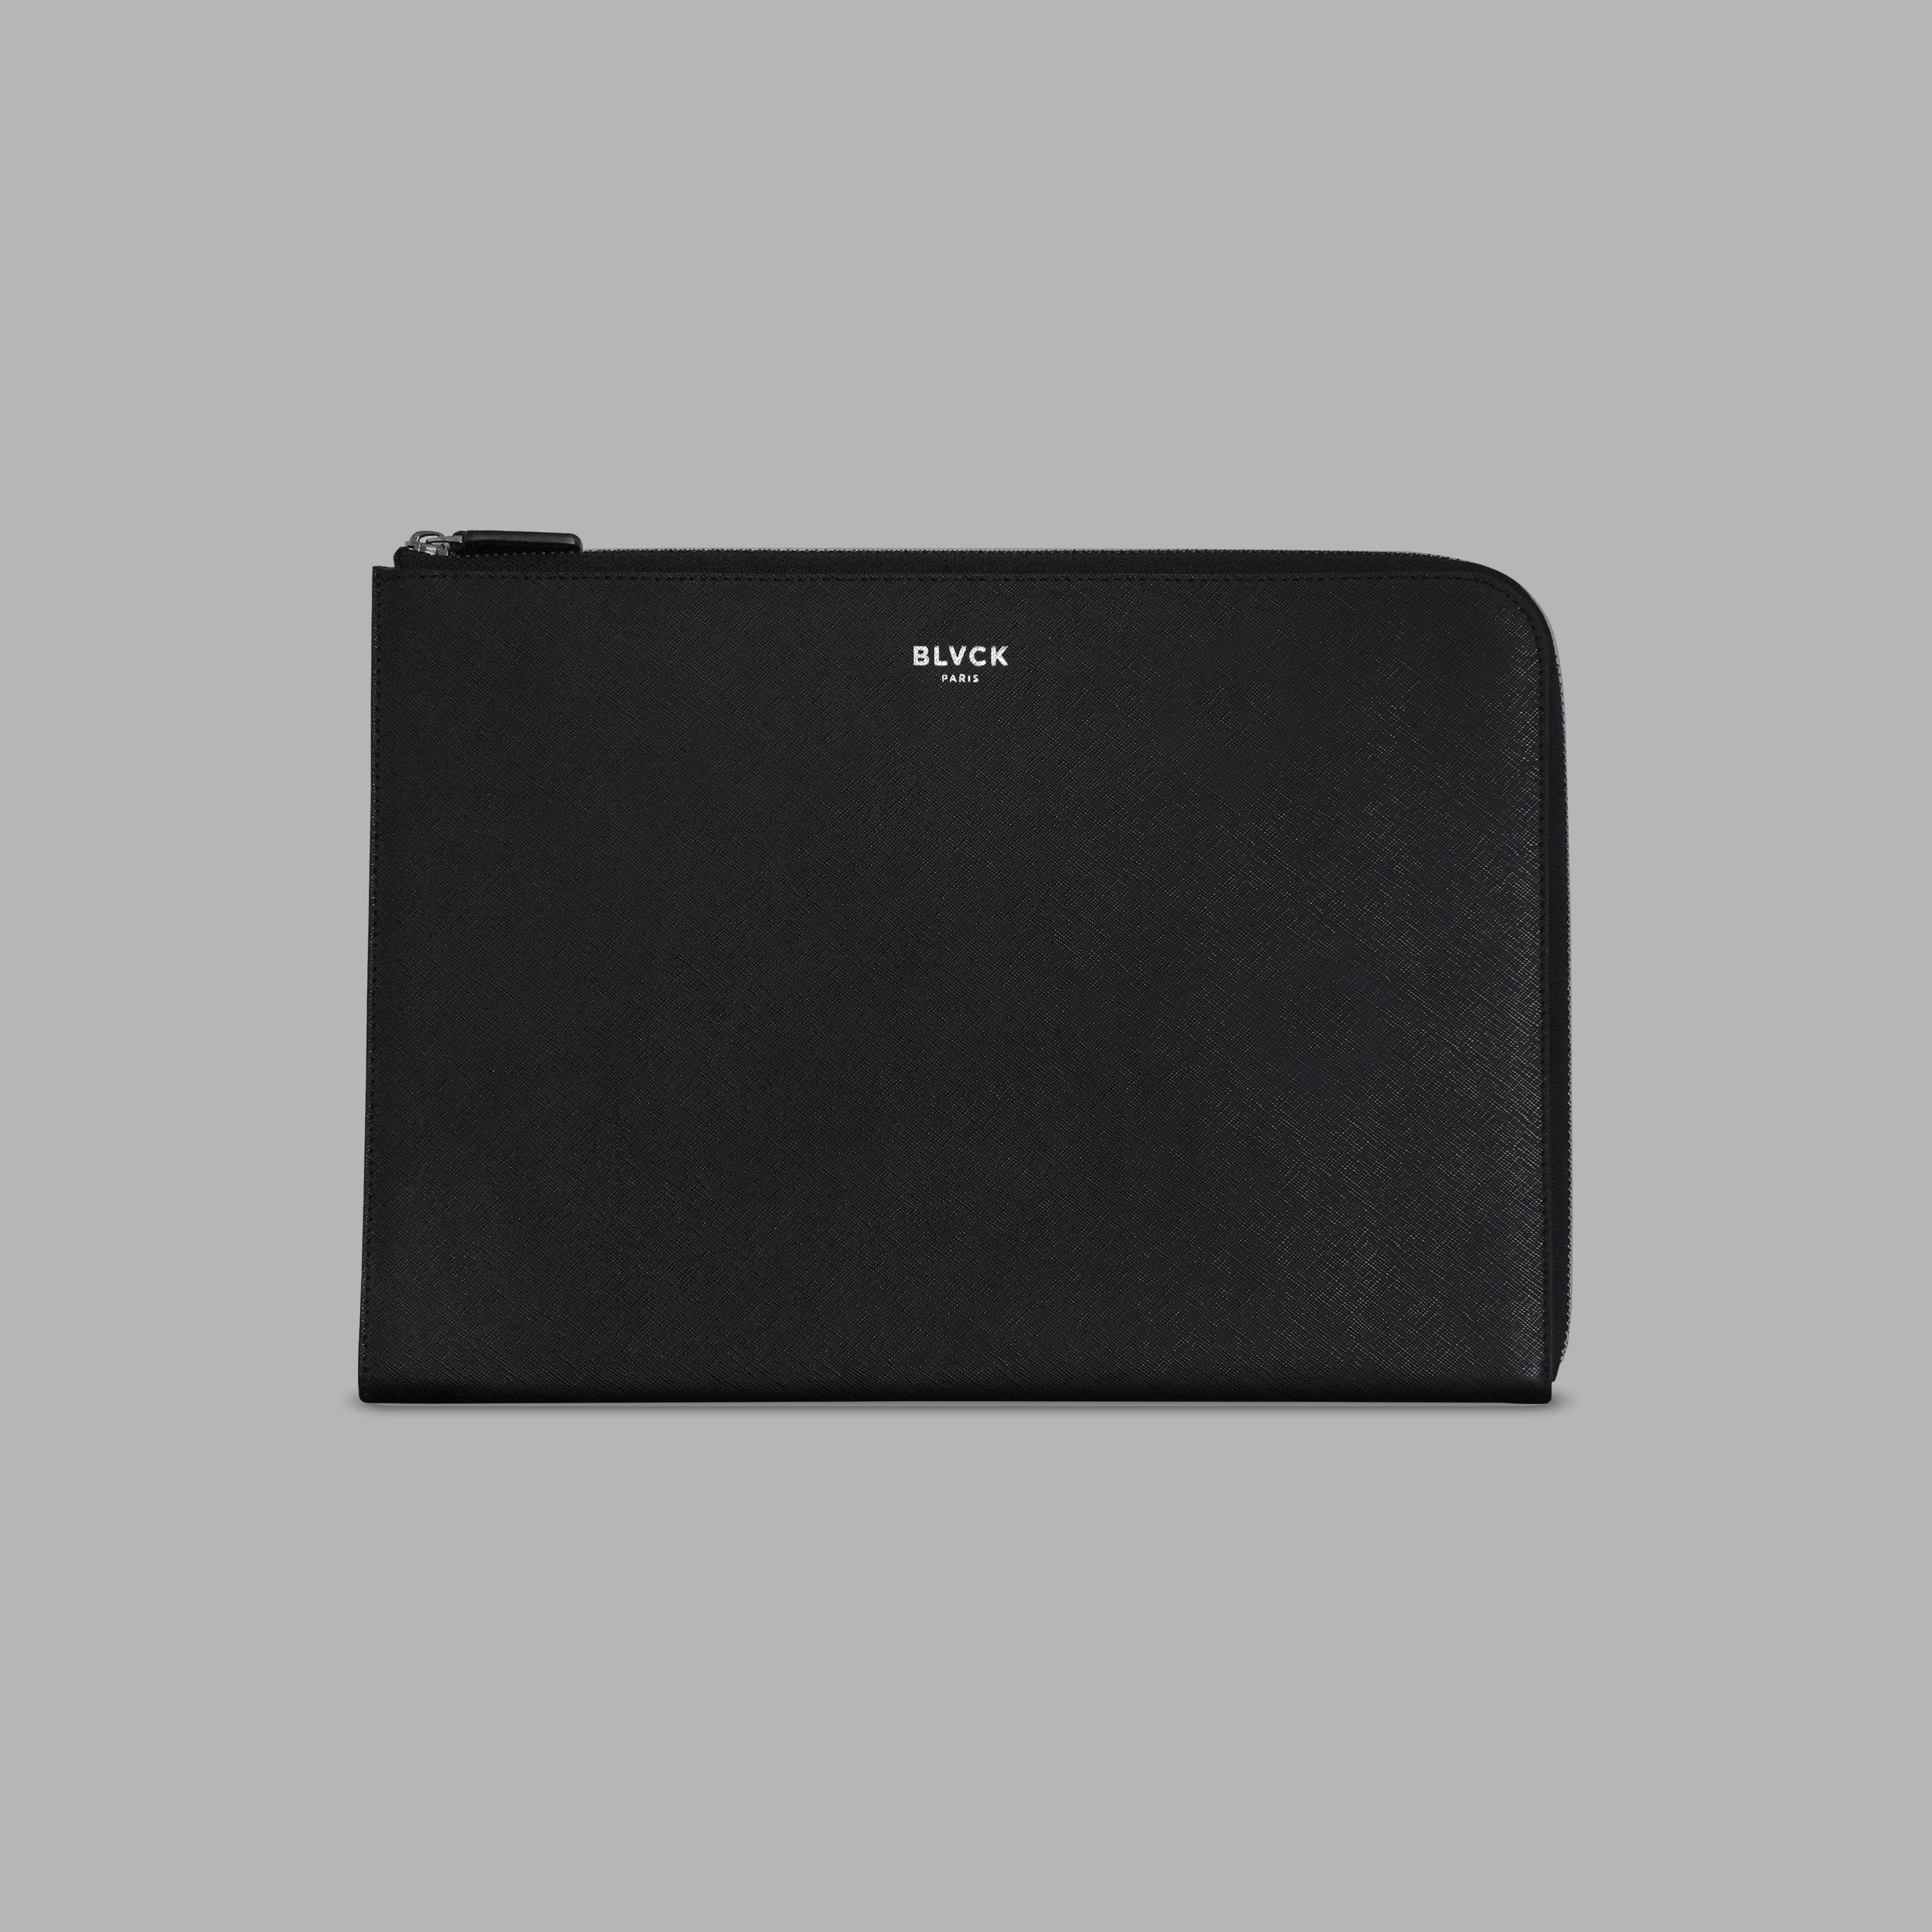 AbChic 10-11 Designer Laptop Sleeve also for 11 Apple MB Air in Black  Pattern